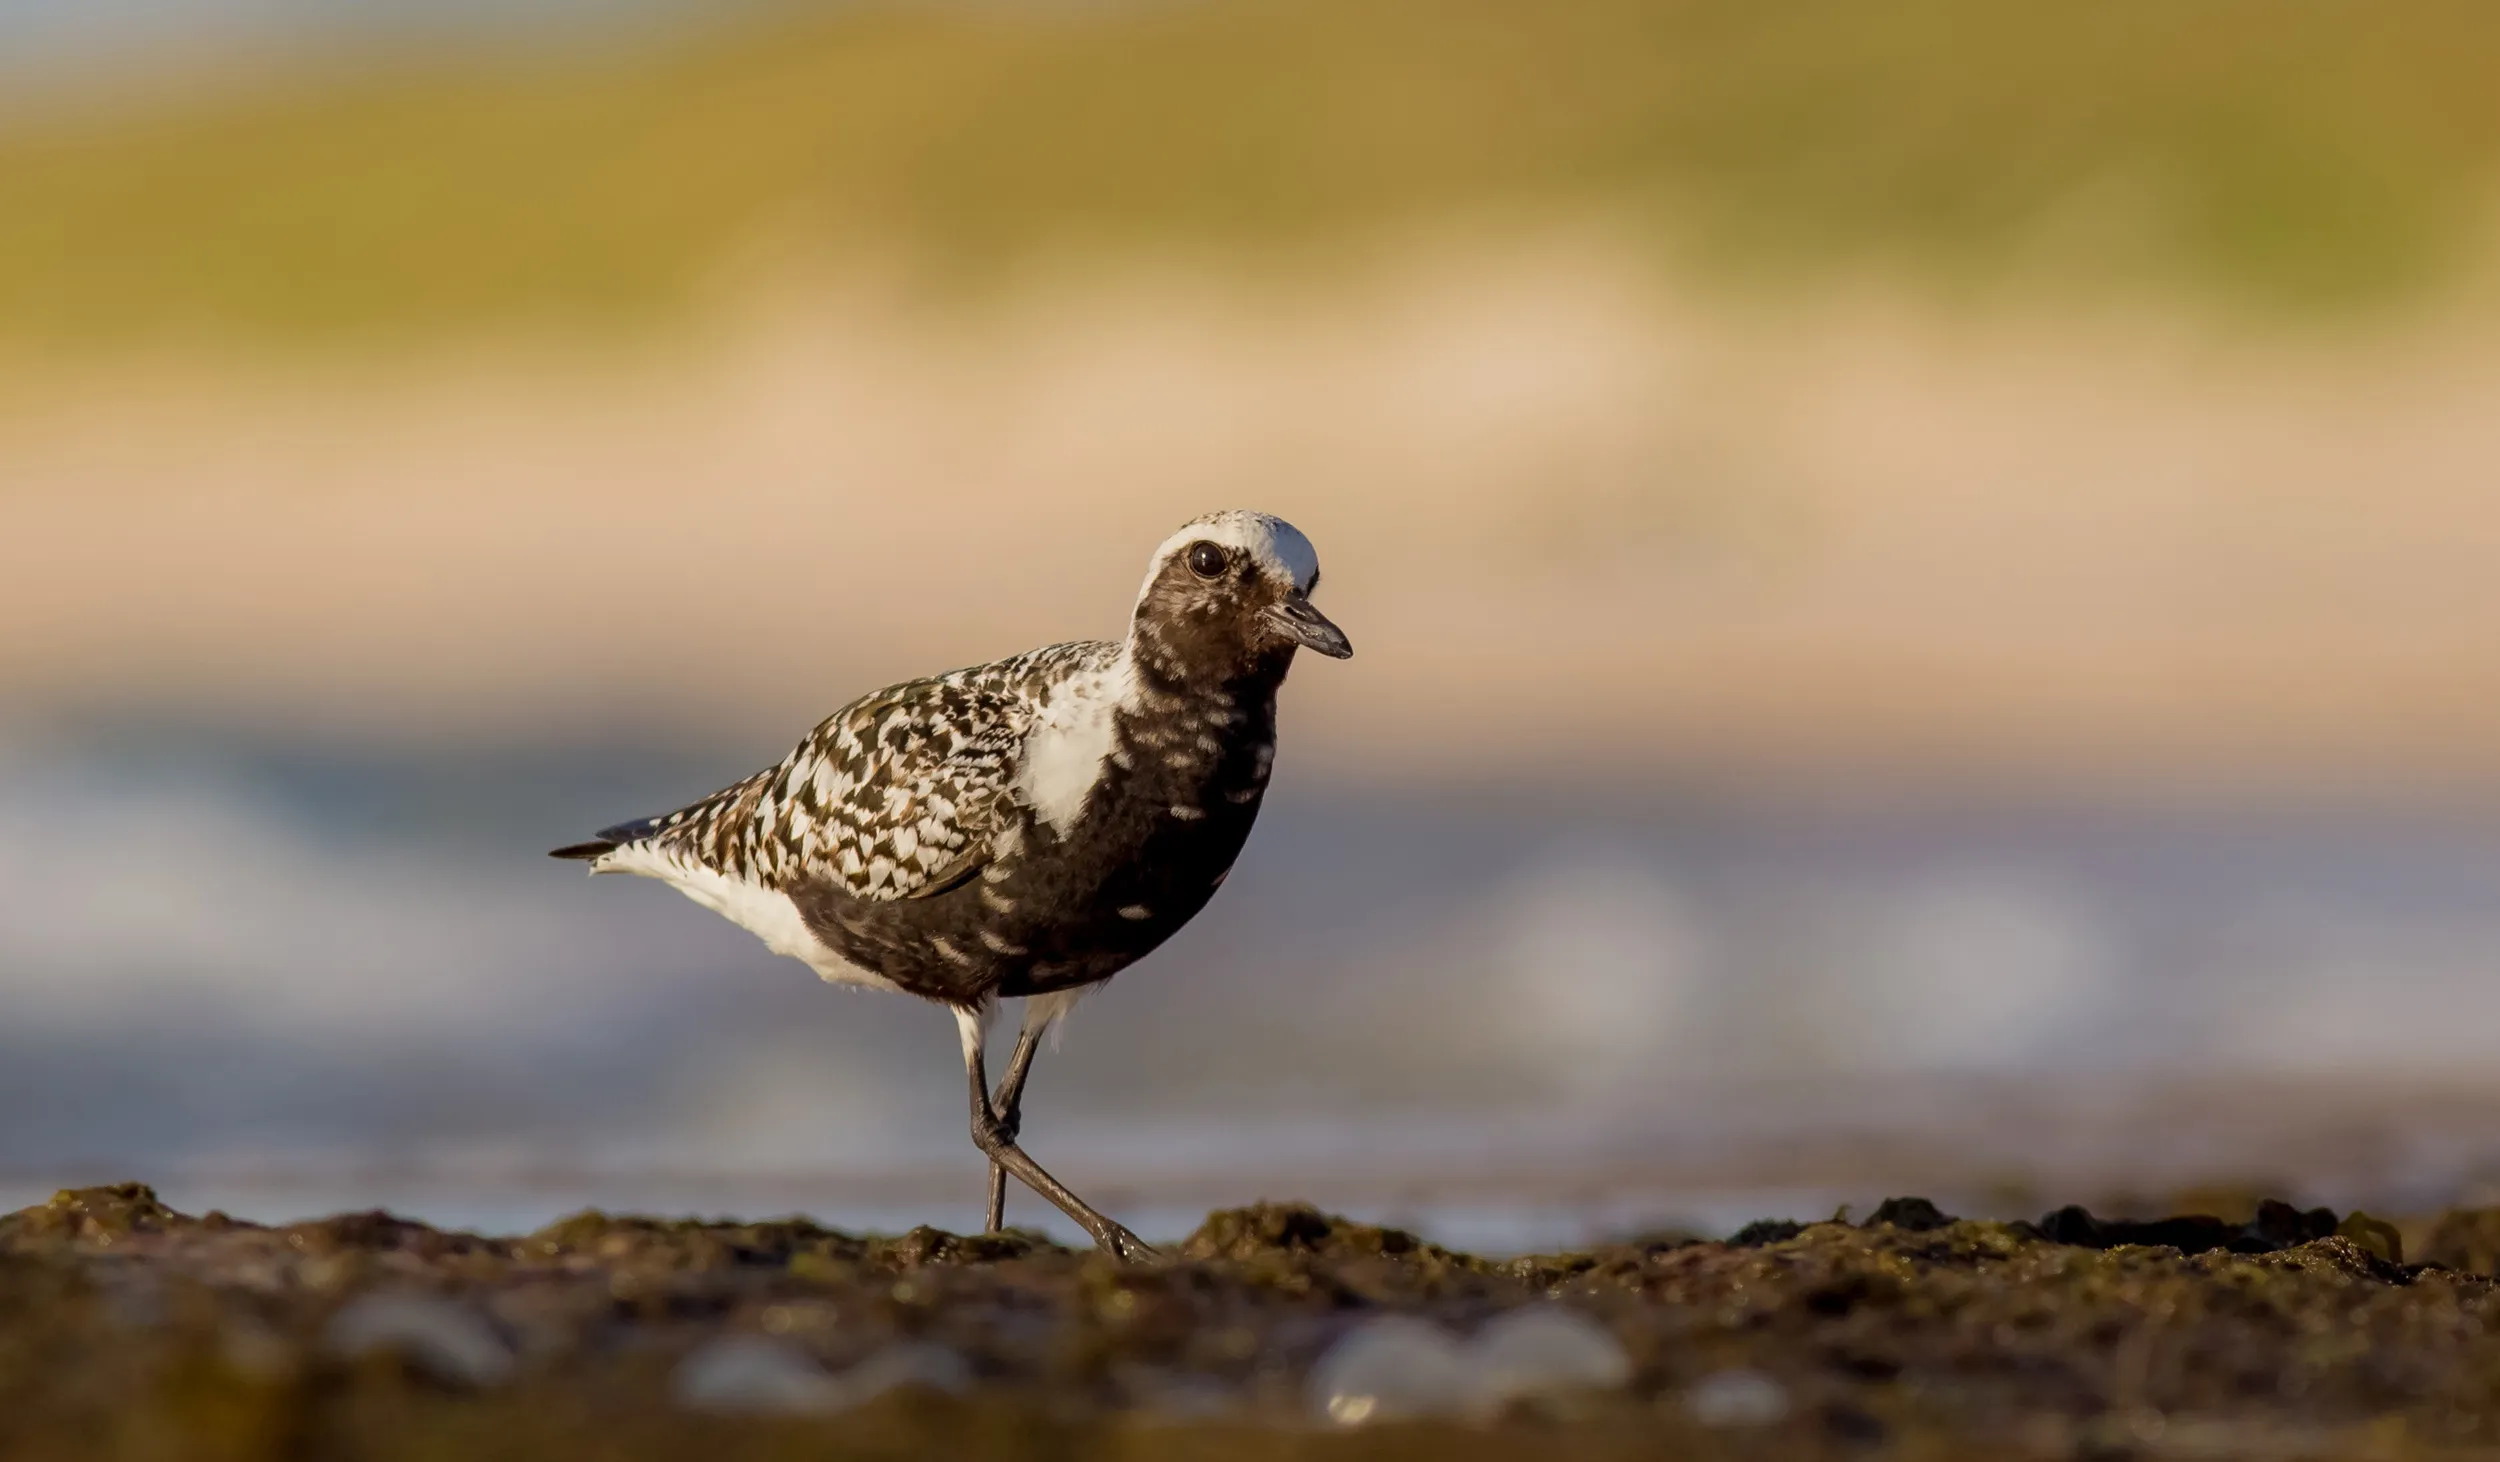 Grey Plover with summer plumage, walking on a rocky section of beach